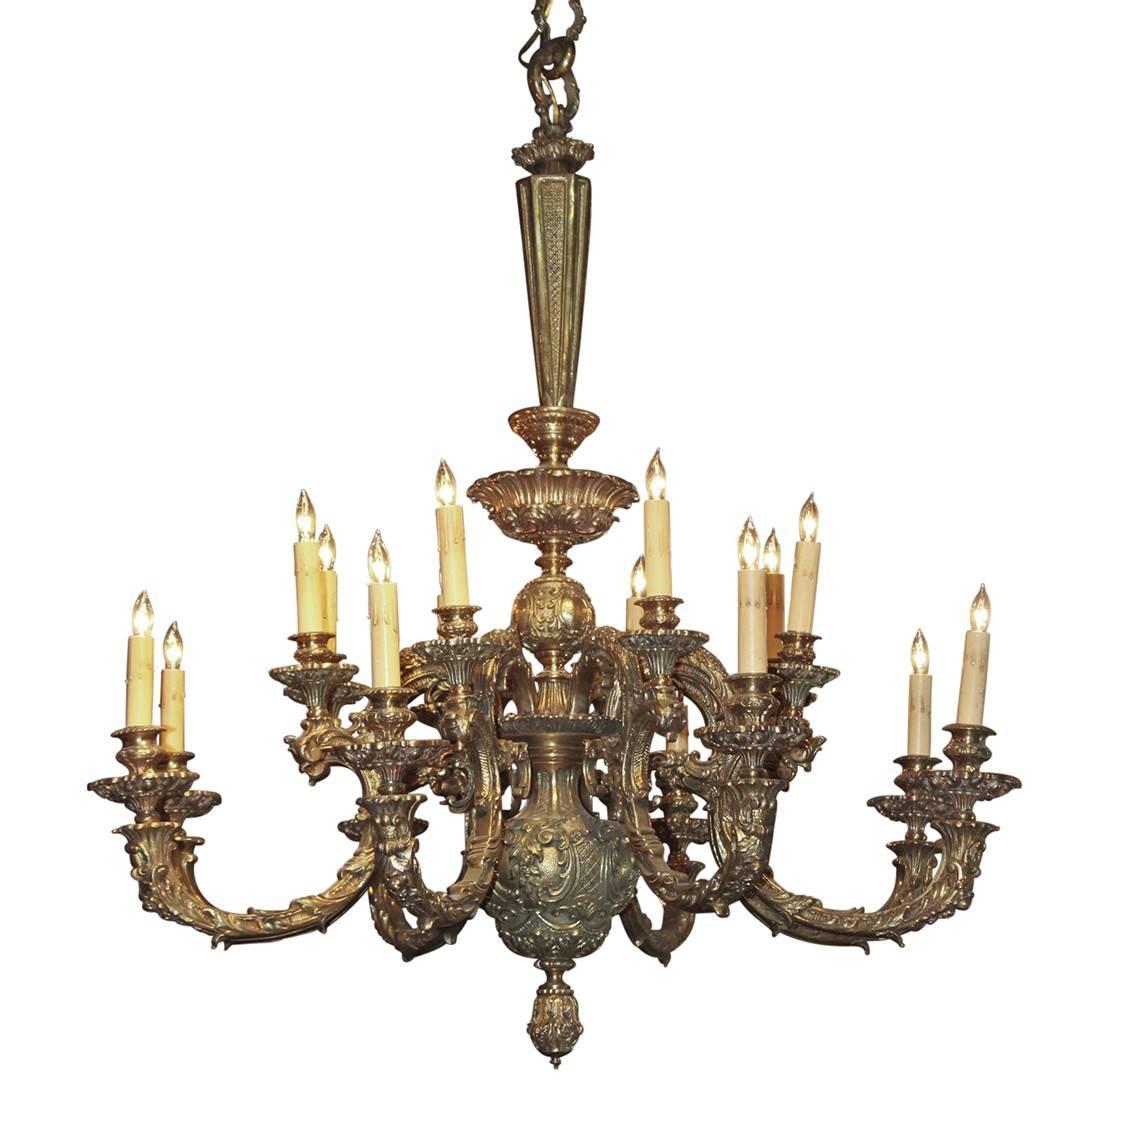 French Embossed Bronze Rococo Style Chandelier